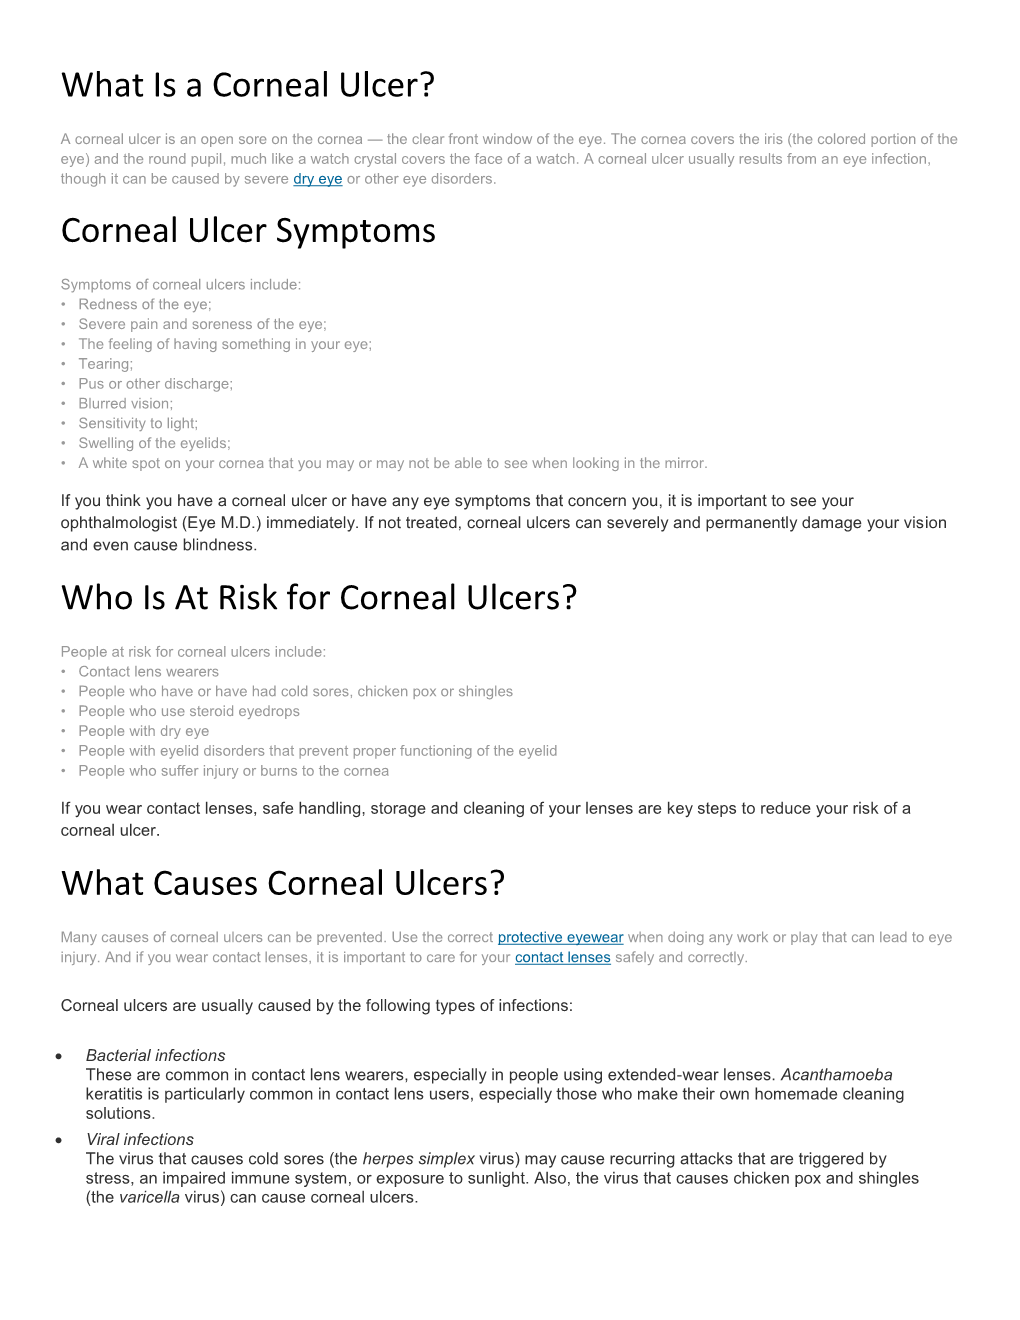 What Causes Corneal Ulcers?